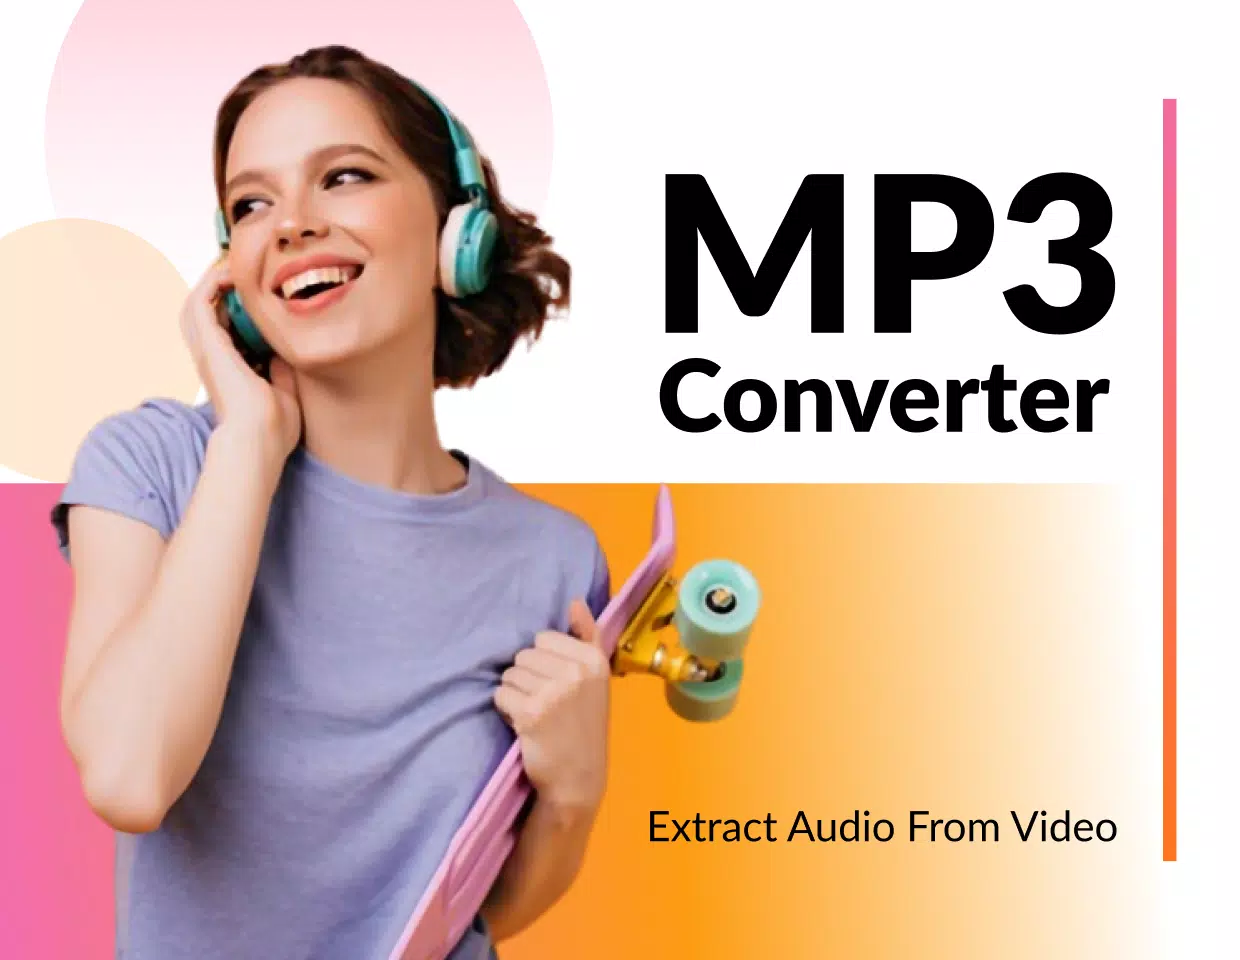 Mp3 Converter: Video Converter for Android - APK Download